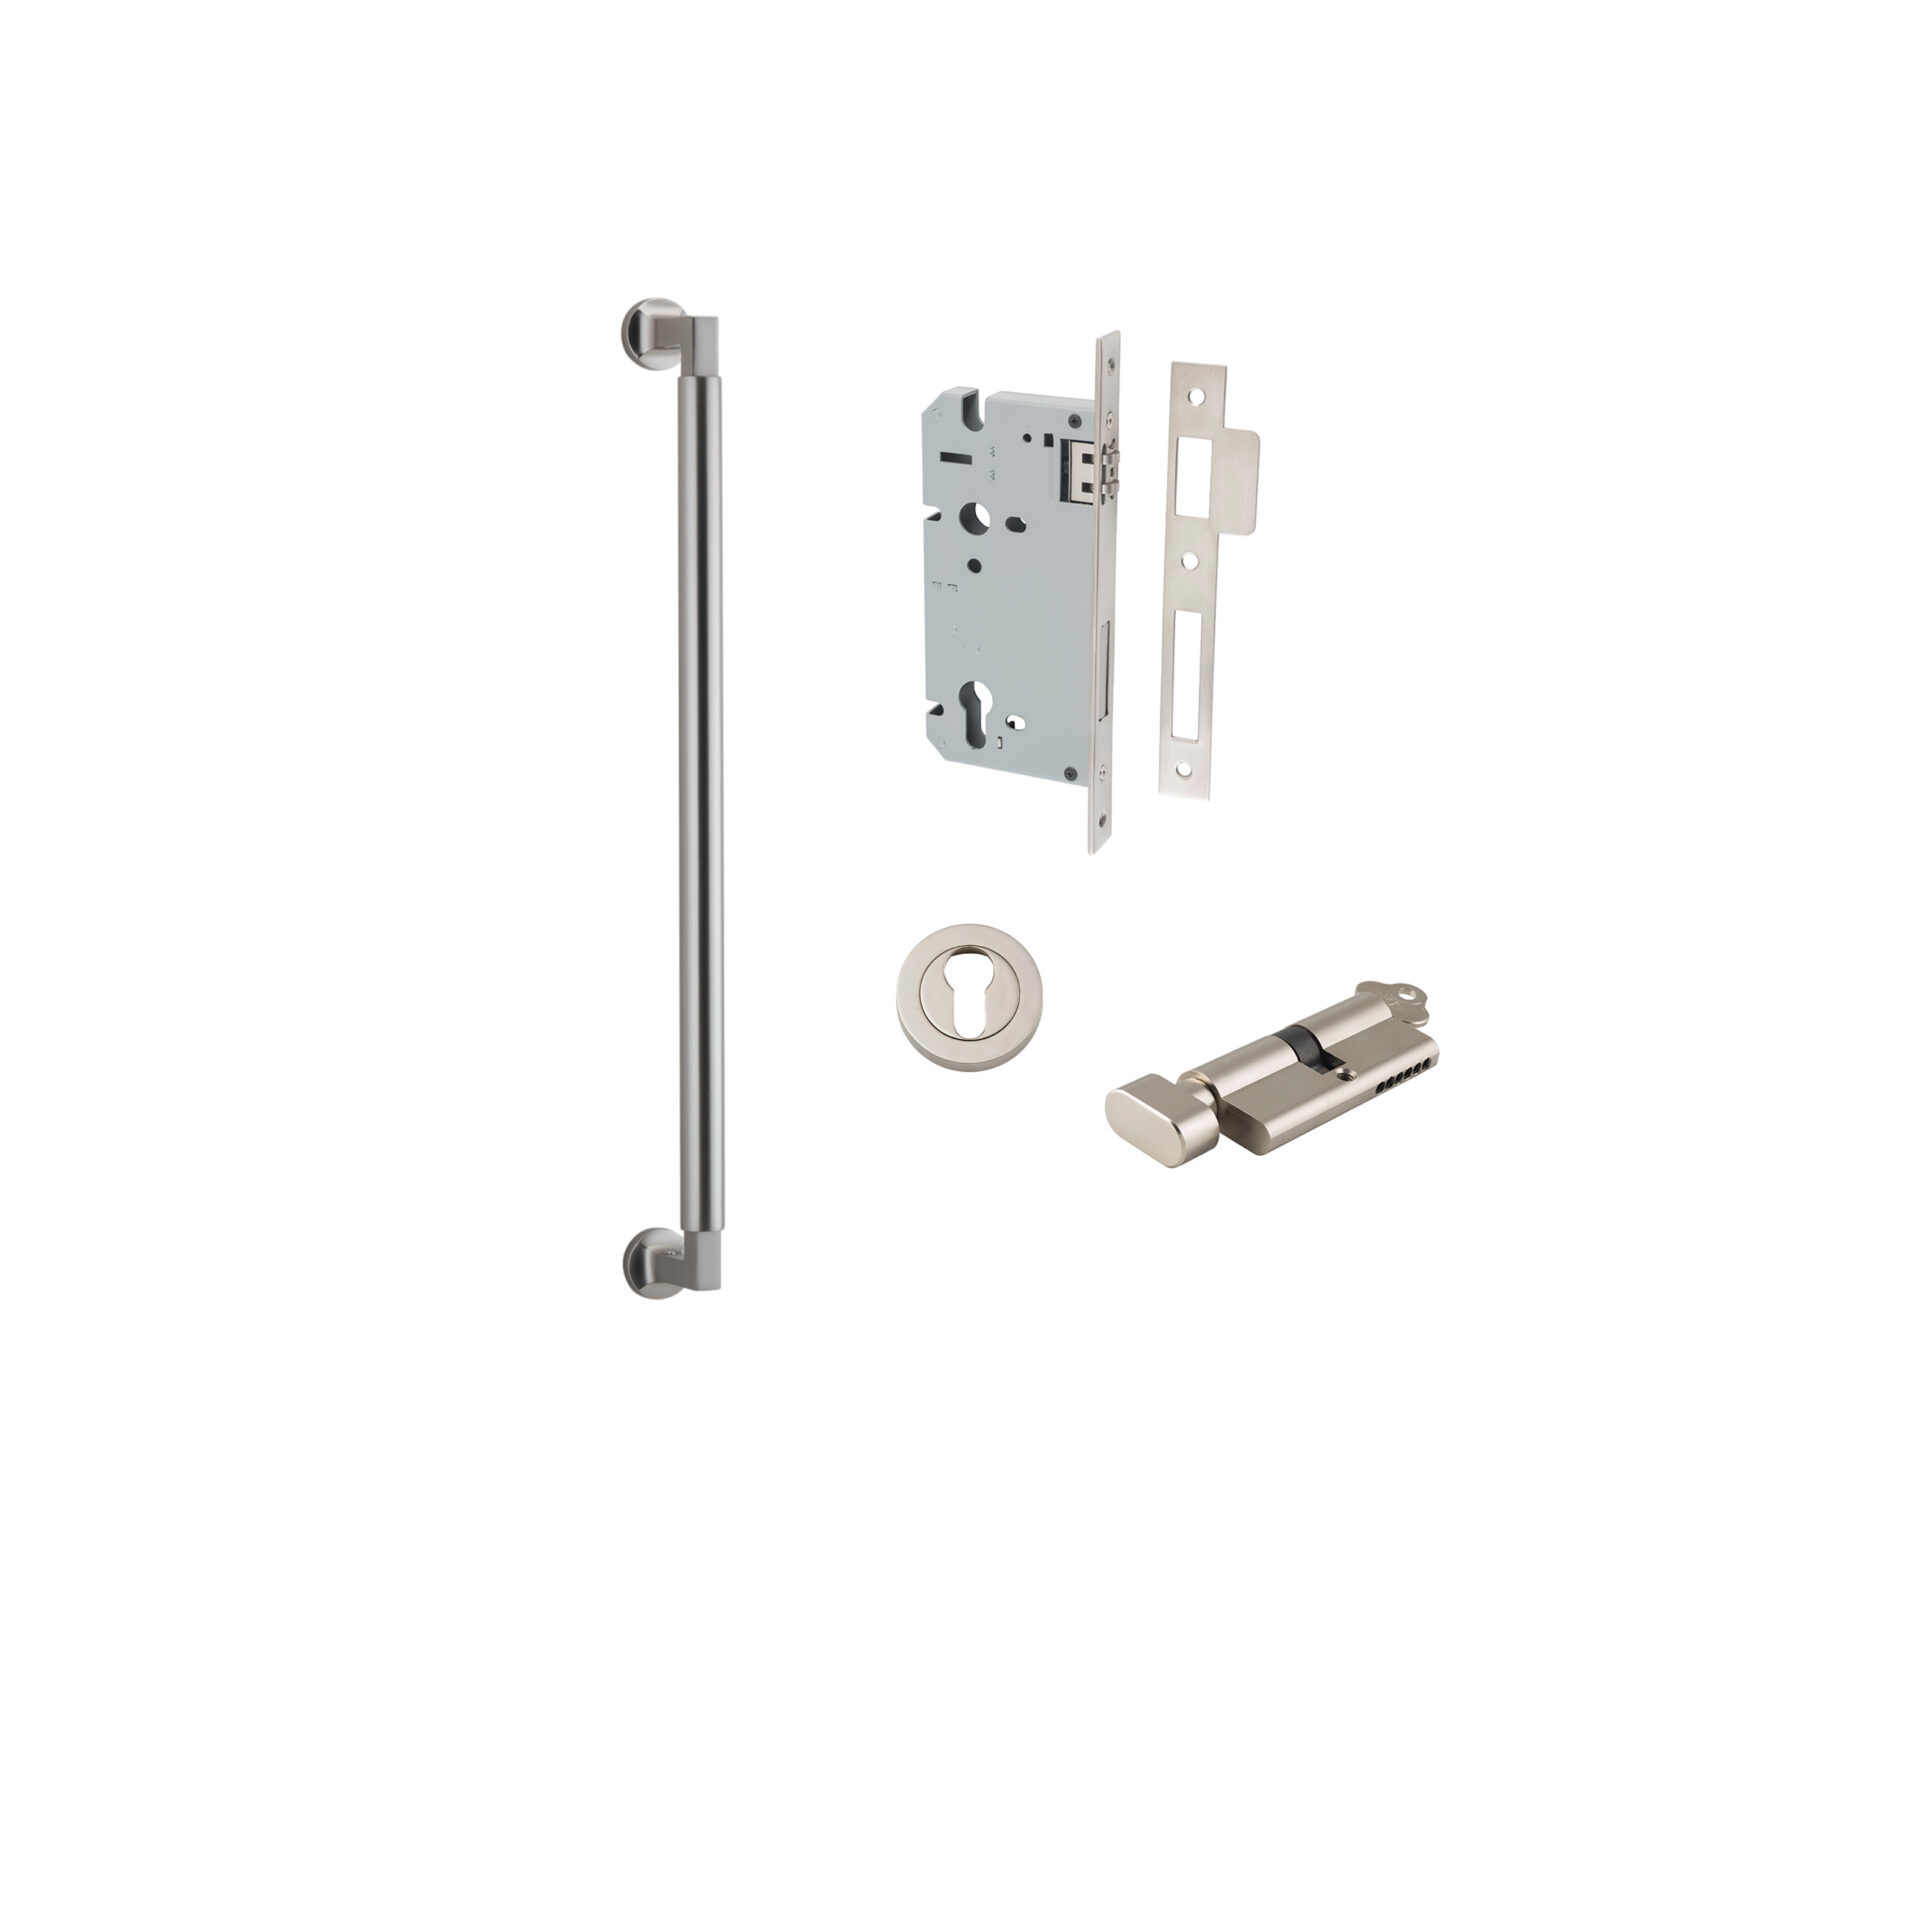 9449KENTR60KT - Berlin Pull Handle - 450mm Entrance Kit with Separate High Security Lock - Satin Nickel - Entrance